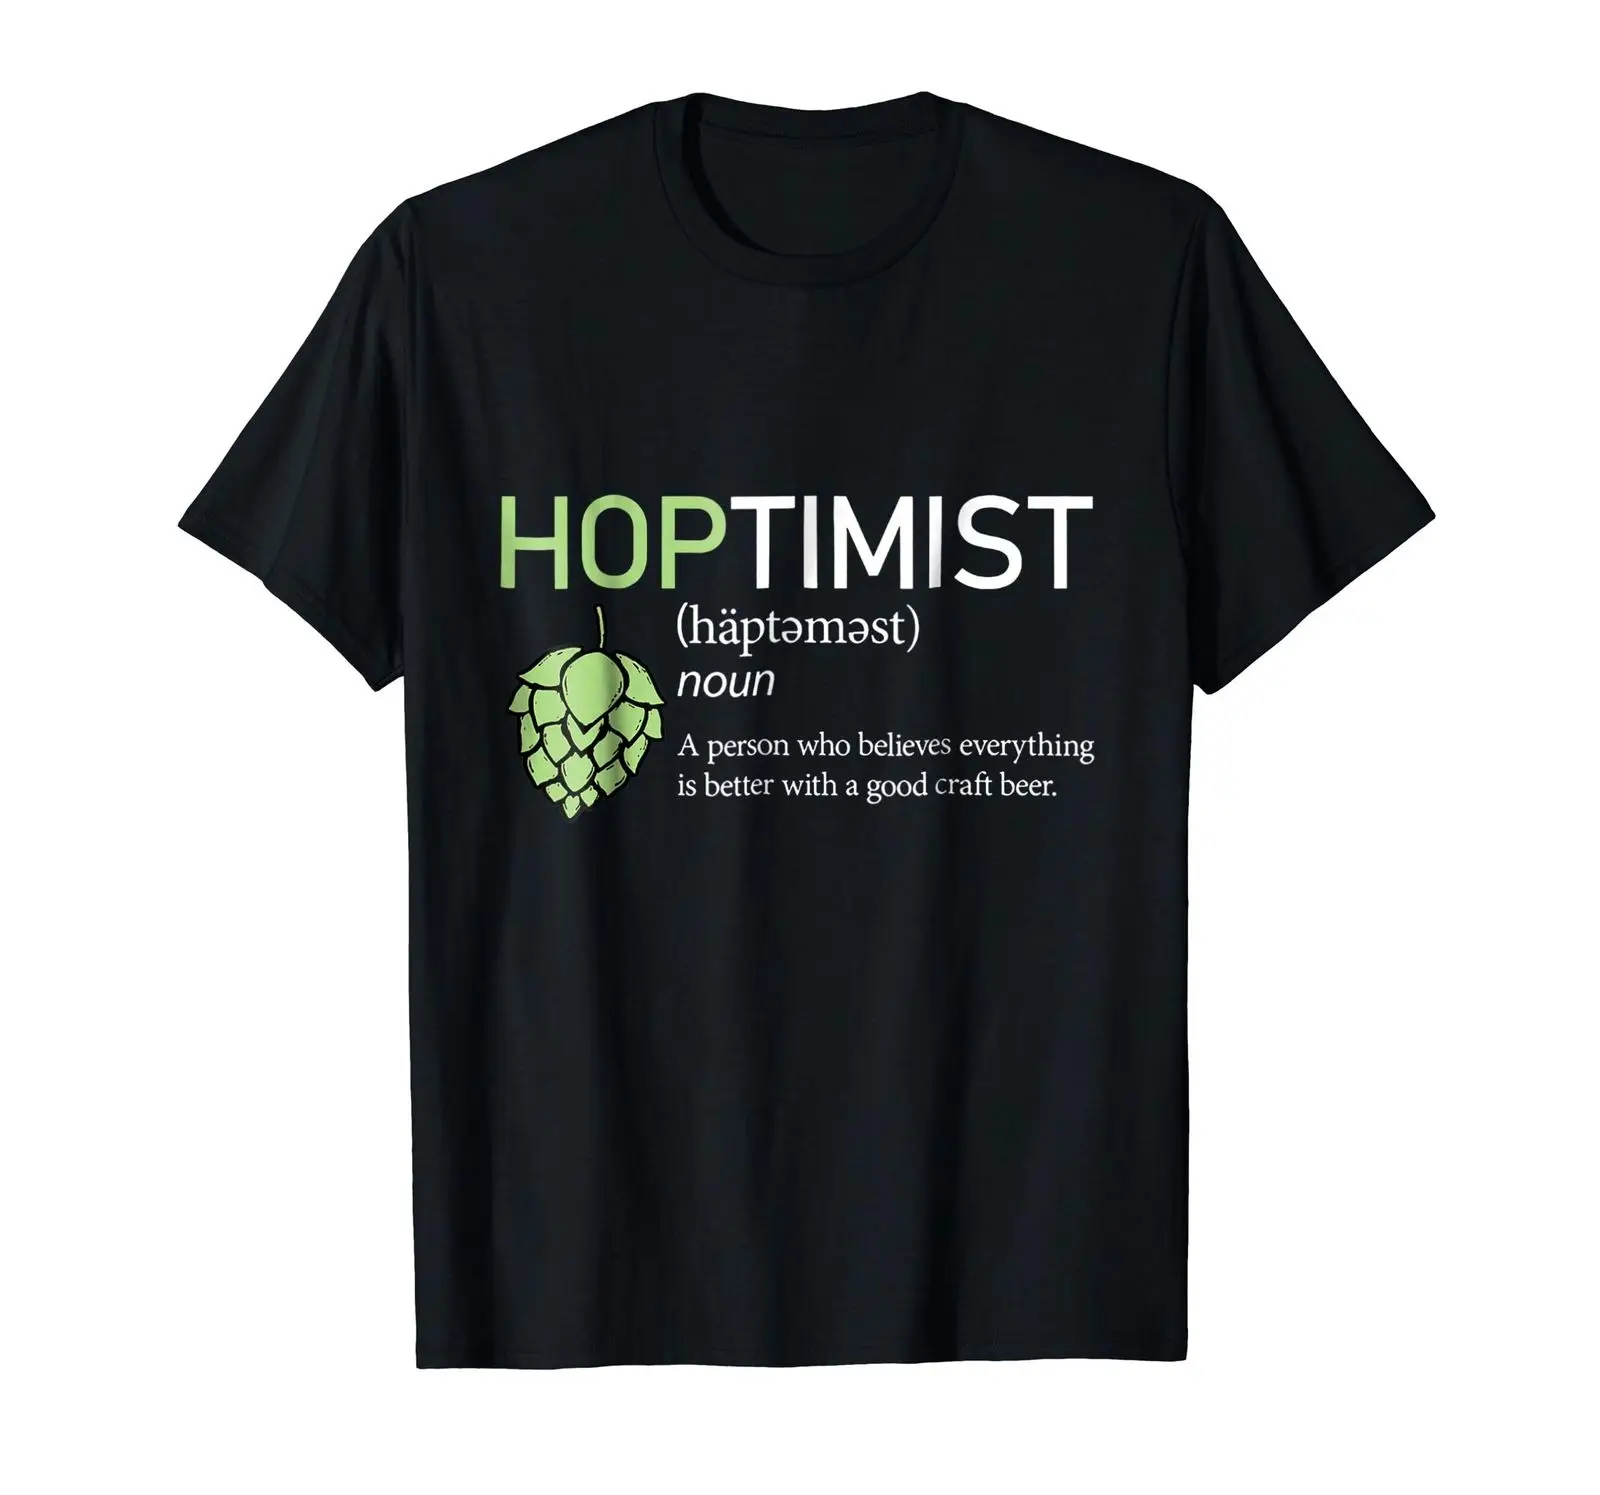 

Hoptimist Definition Black T-Shirt for Brewer and Craft Beer Lover New 2019 Popular Famous Brand Brand High-Quality O Neck Shirt